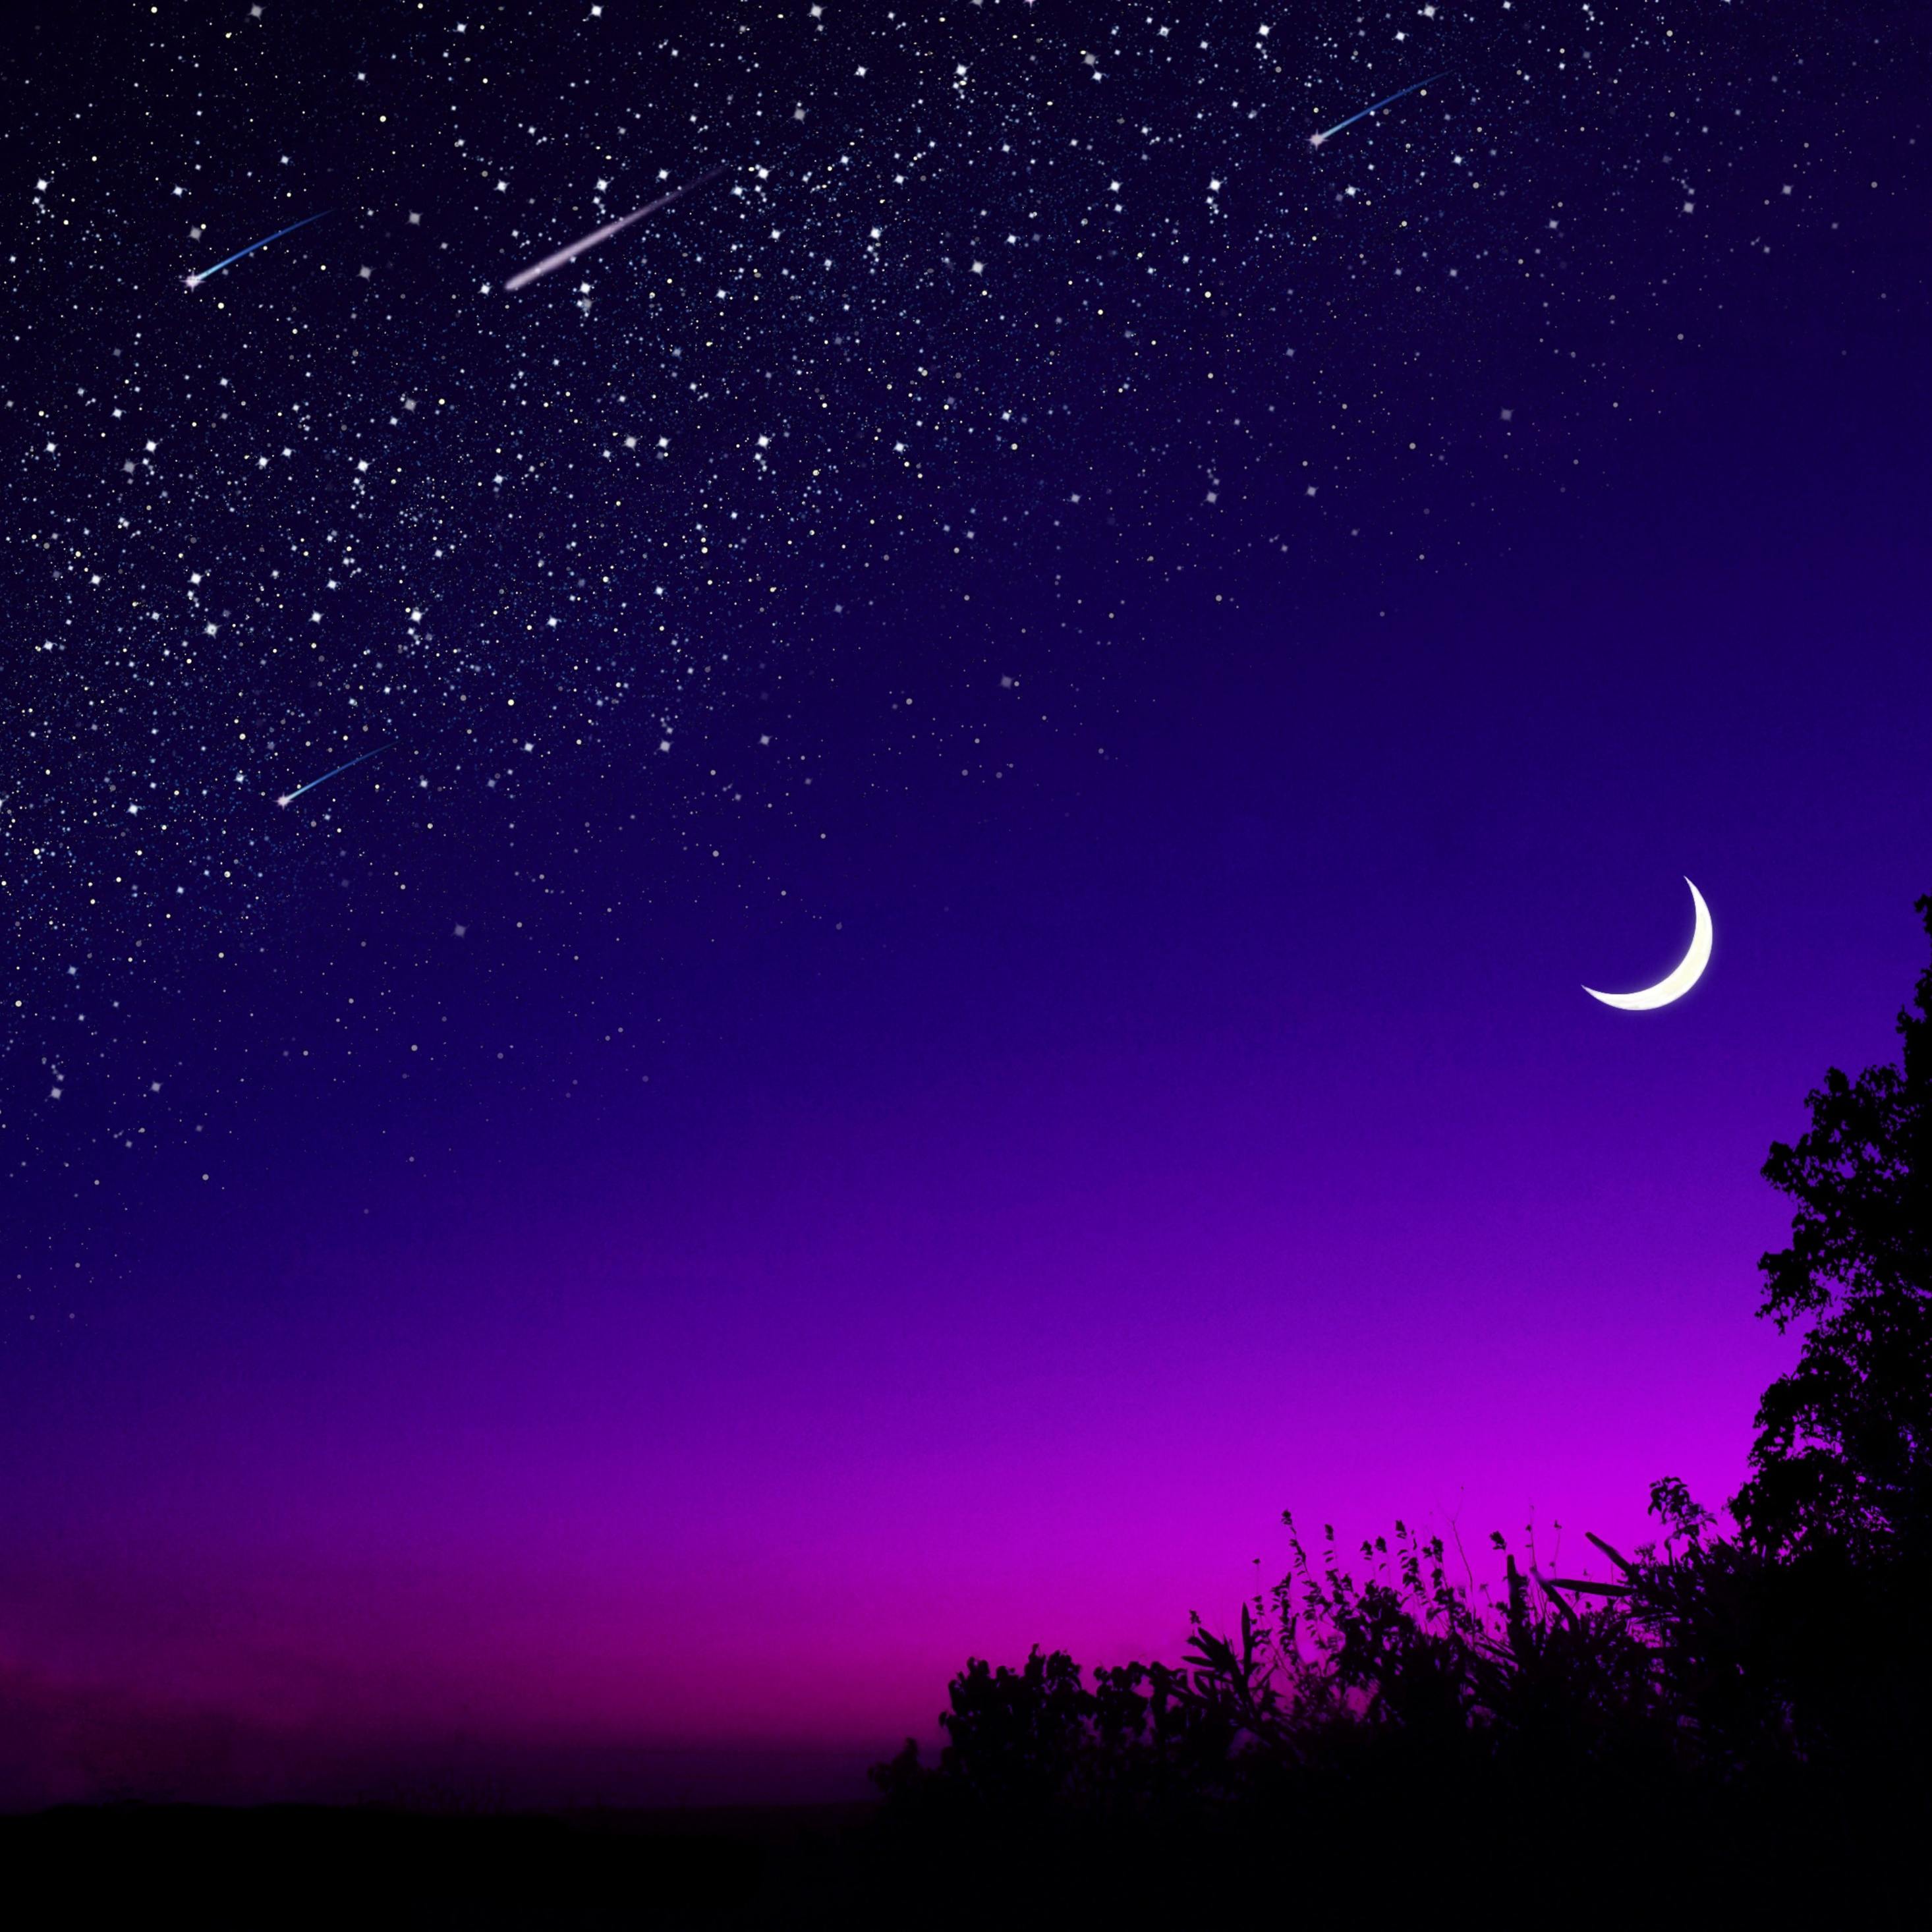 Pretty Pictures Of The Night Sky